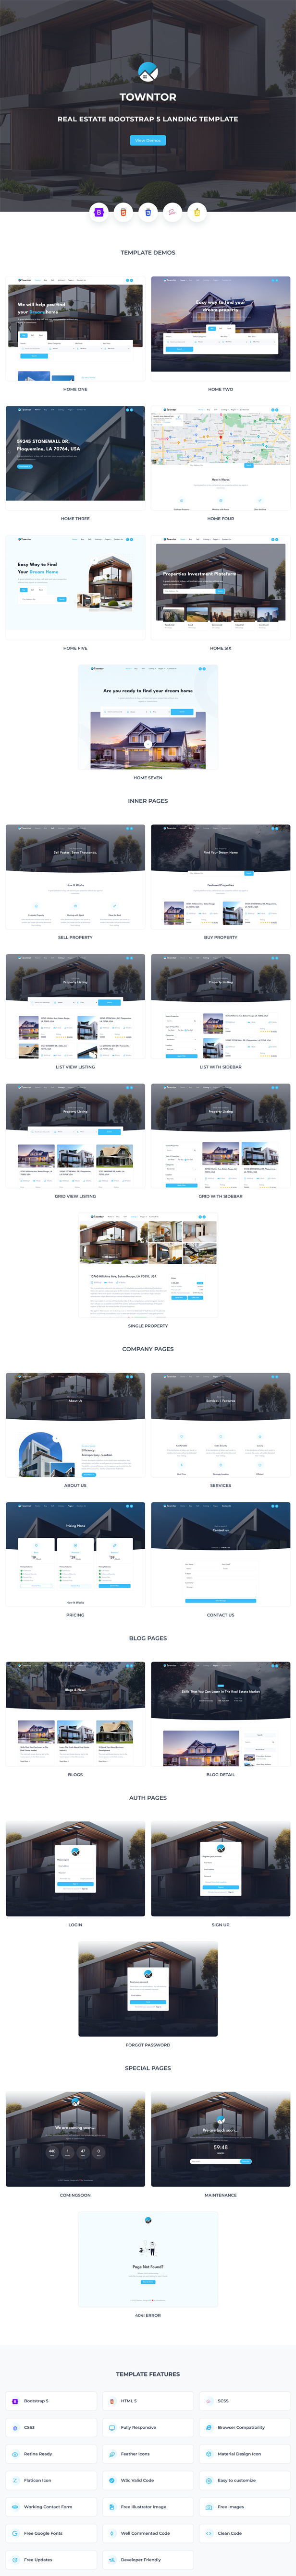 Towntor - Real Estate Bootstrap 5 Landing Template - 1